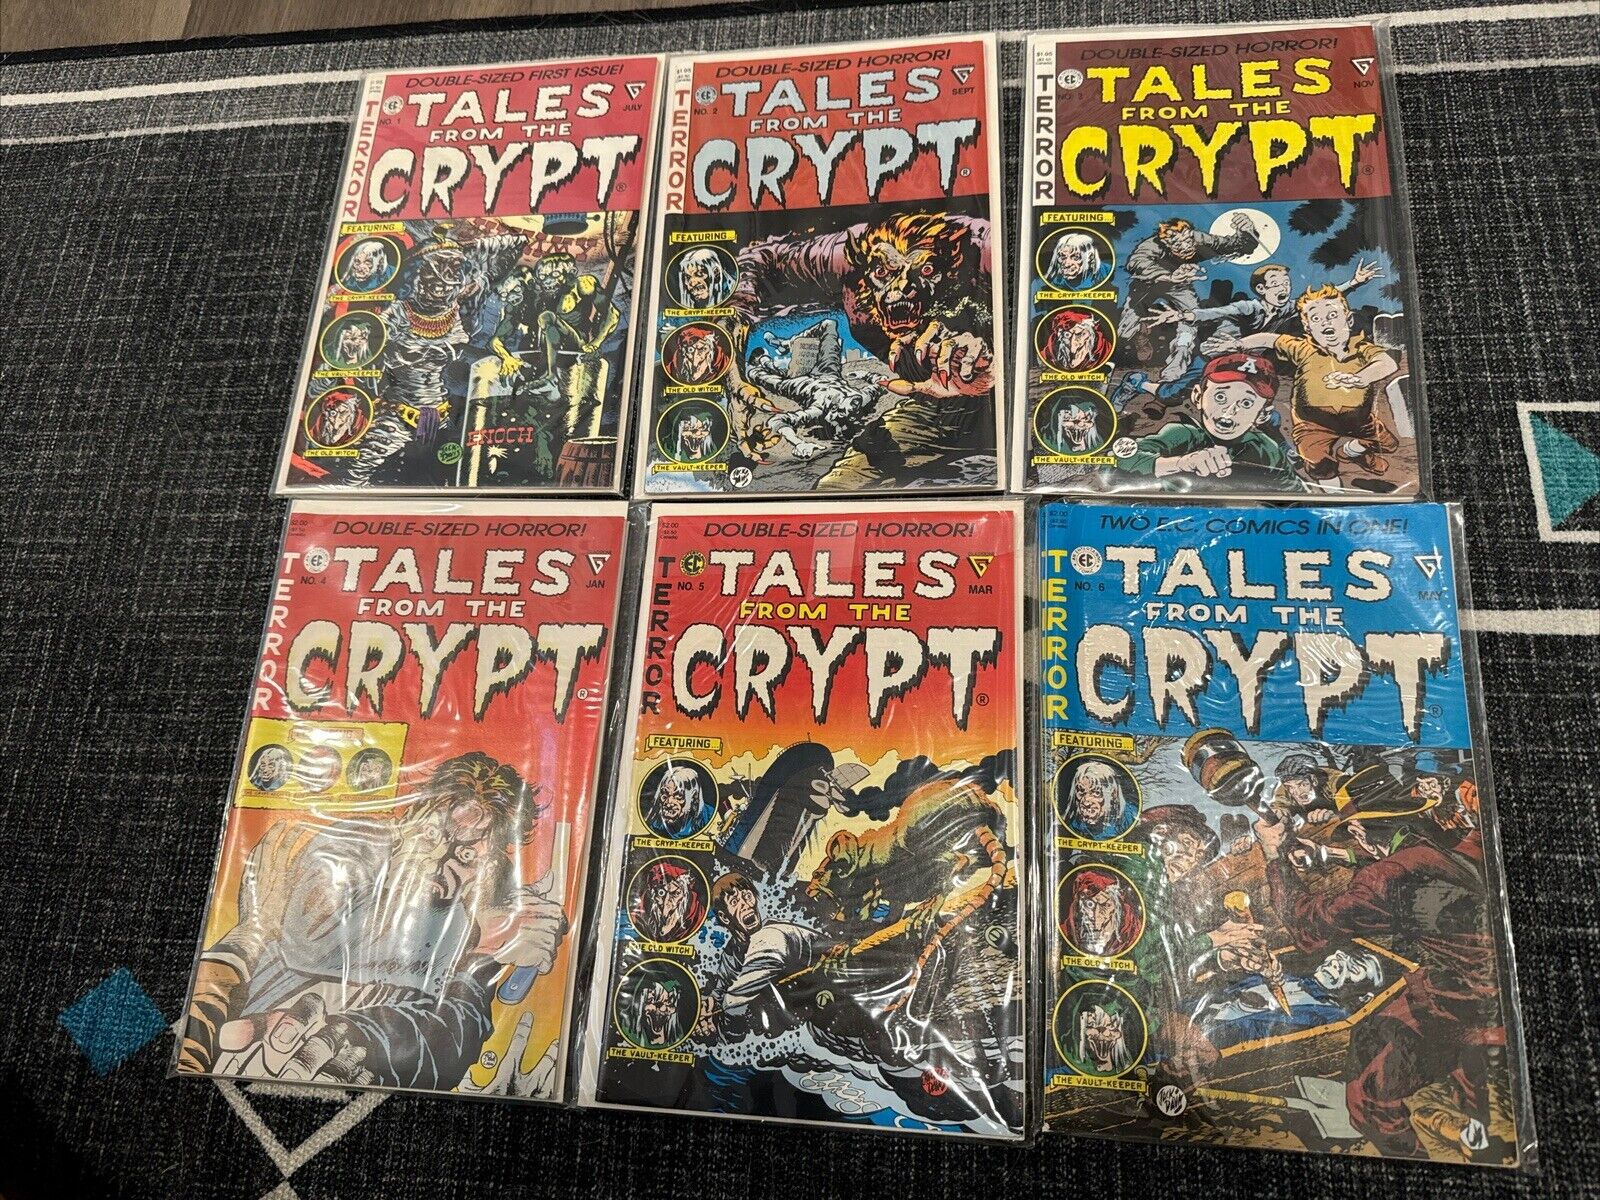 Tales From The Crypt Issue’s 1-6 Gladstone 1990 EC Reprints.